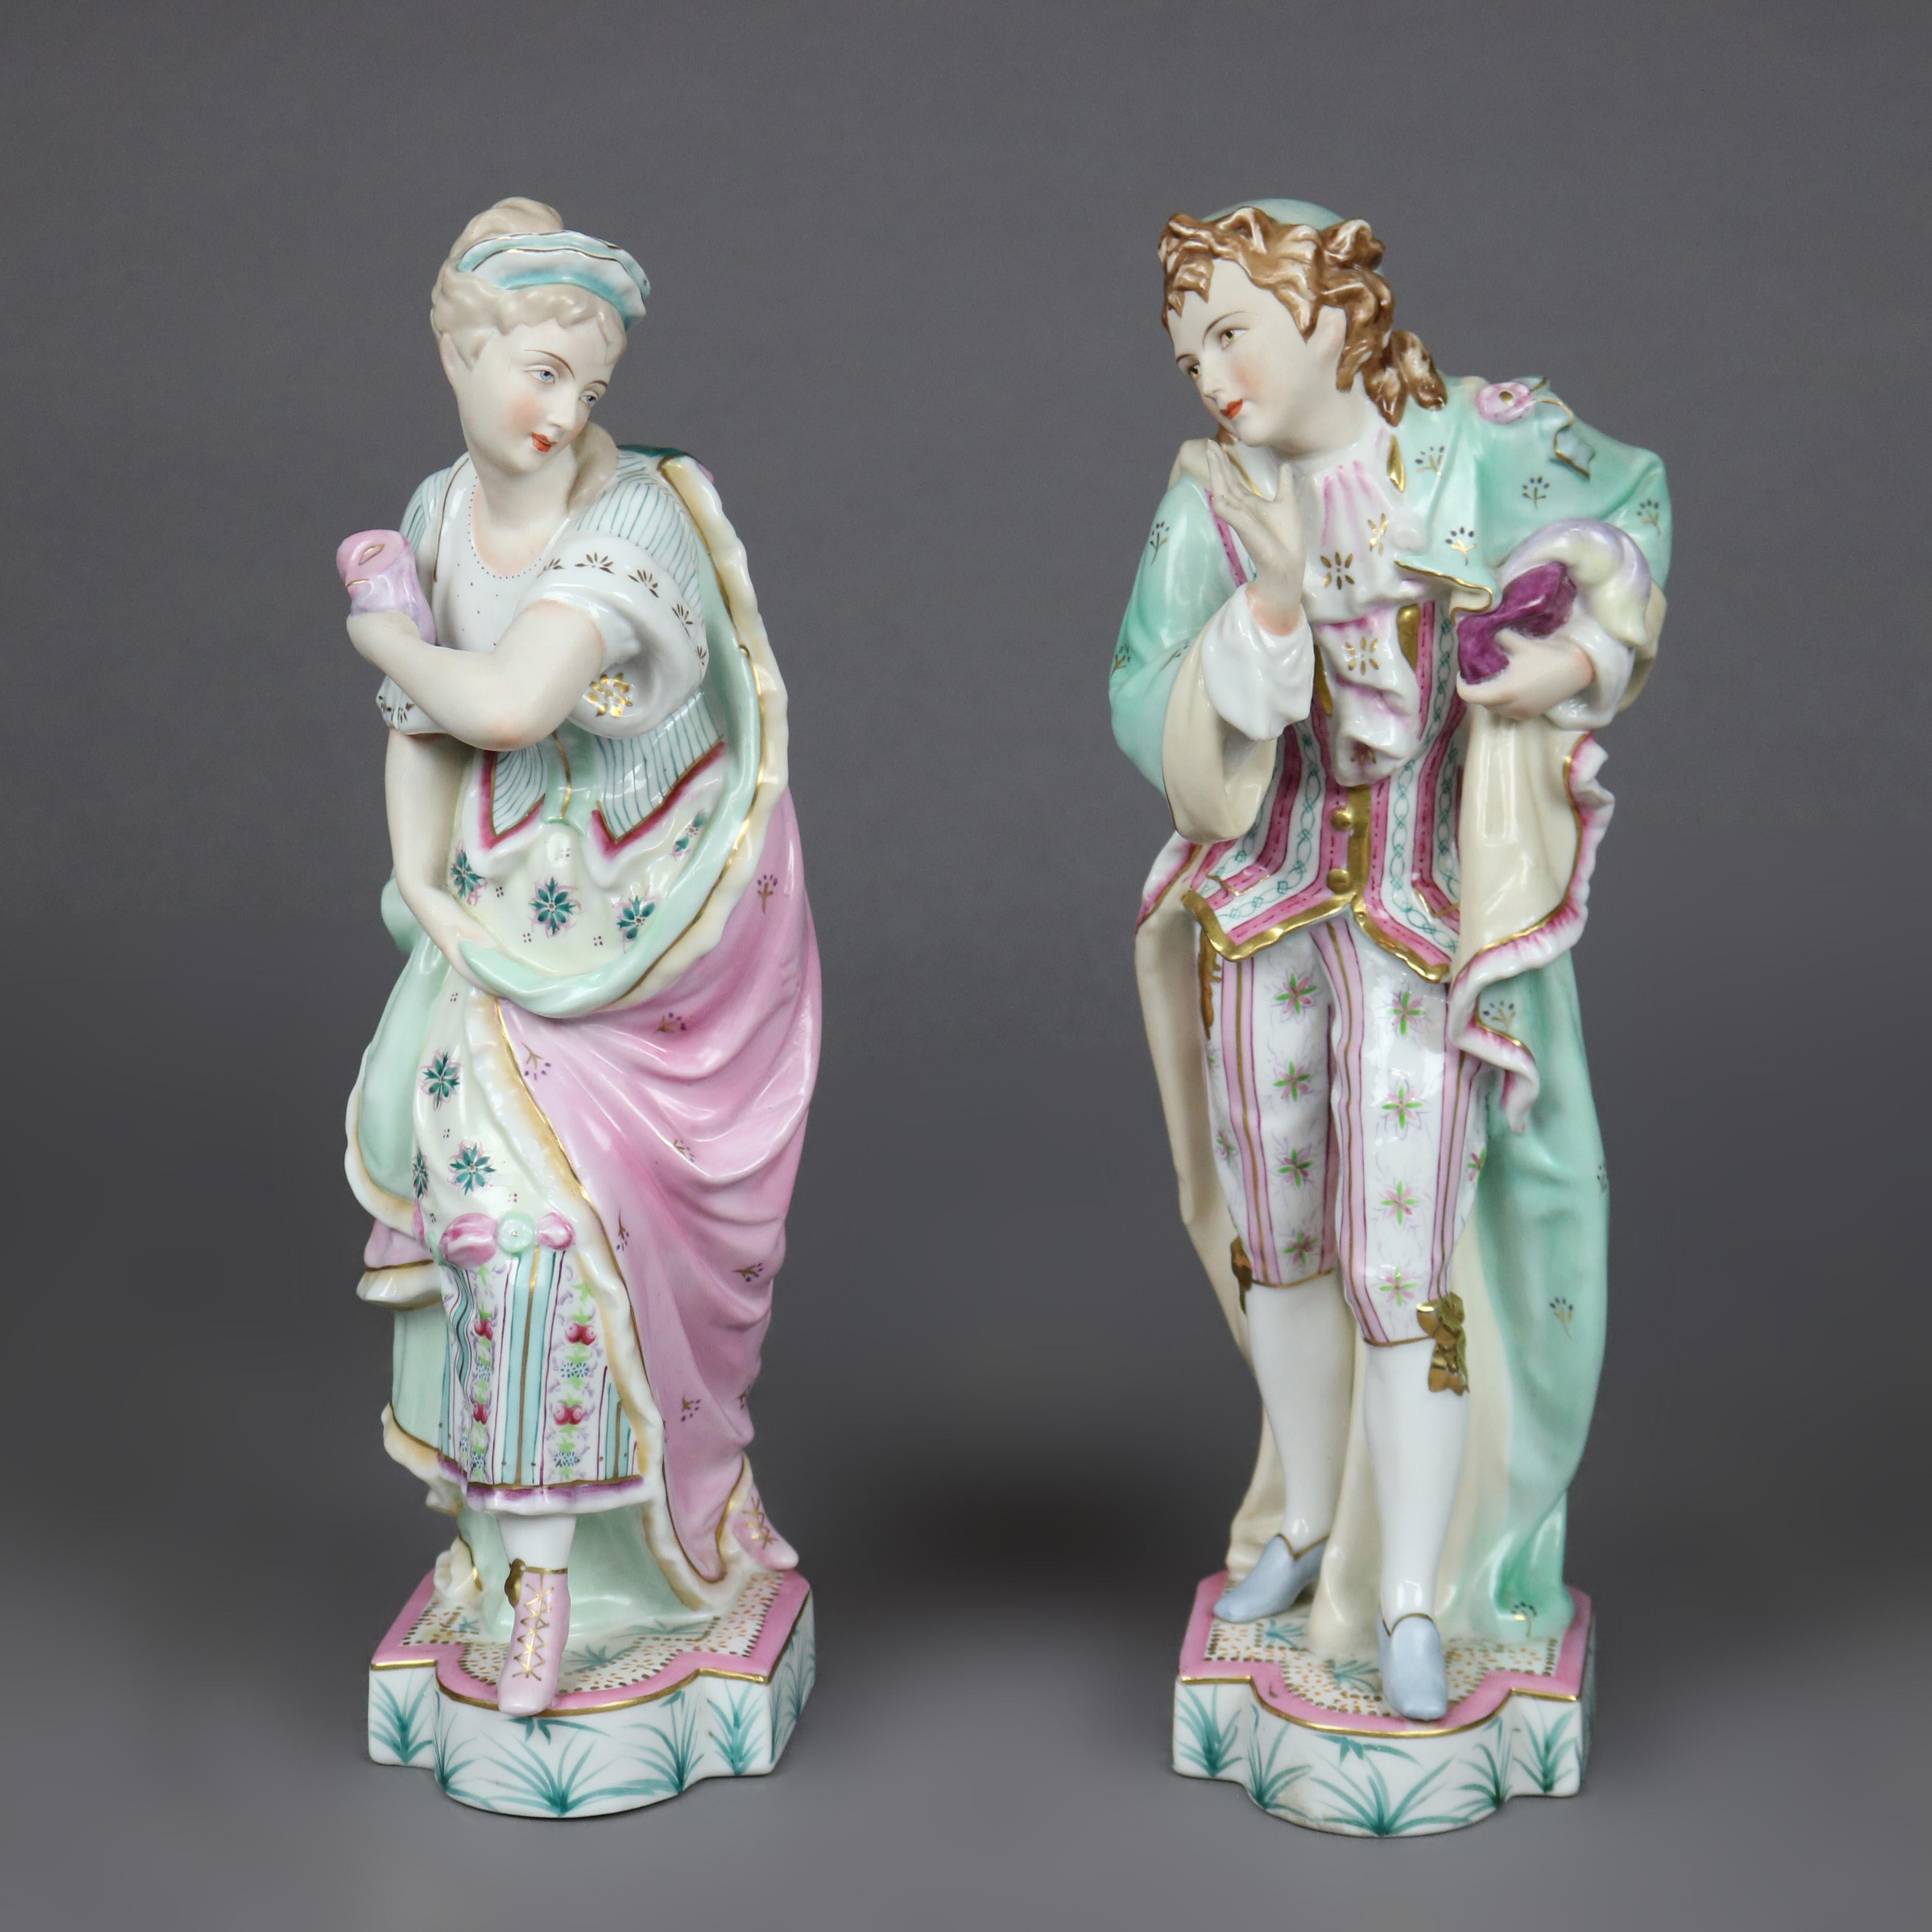 A pair of figures by Sylvan offers courting couple in porcelain construction, hand painted with gilt highlights, maker mark on base as photographed, 20th century

Measures - 12.5